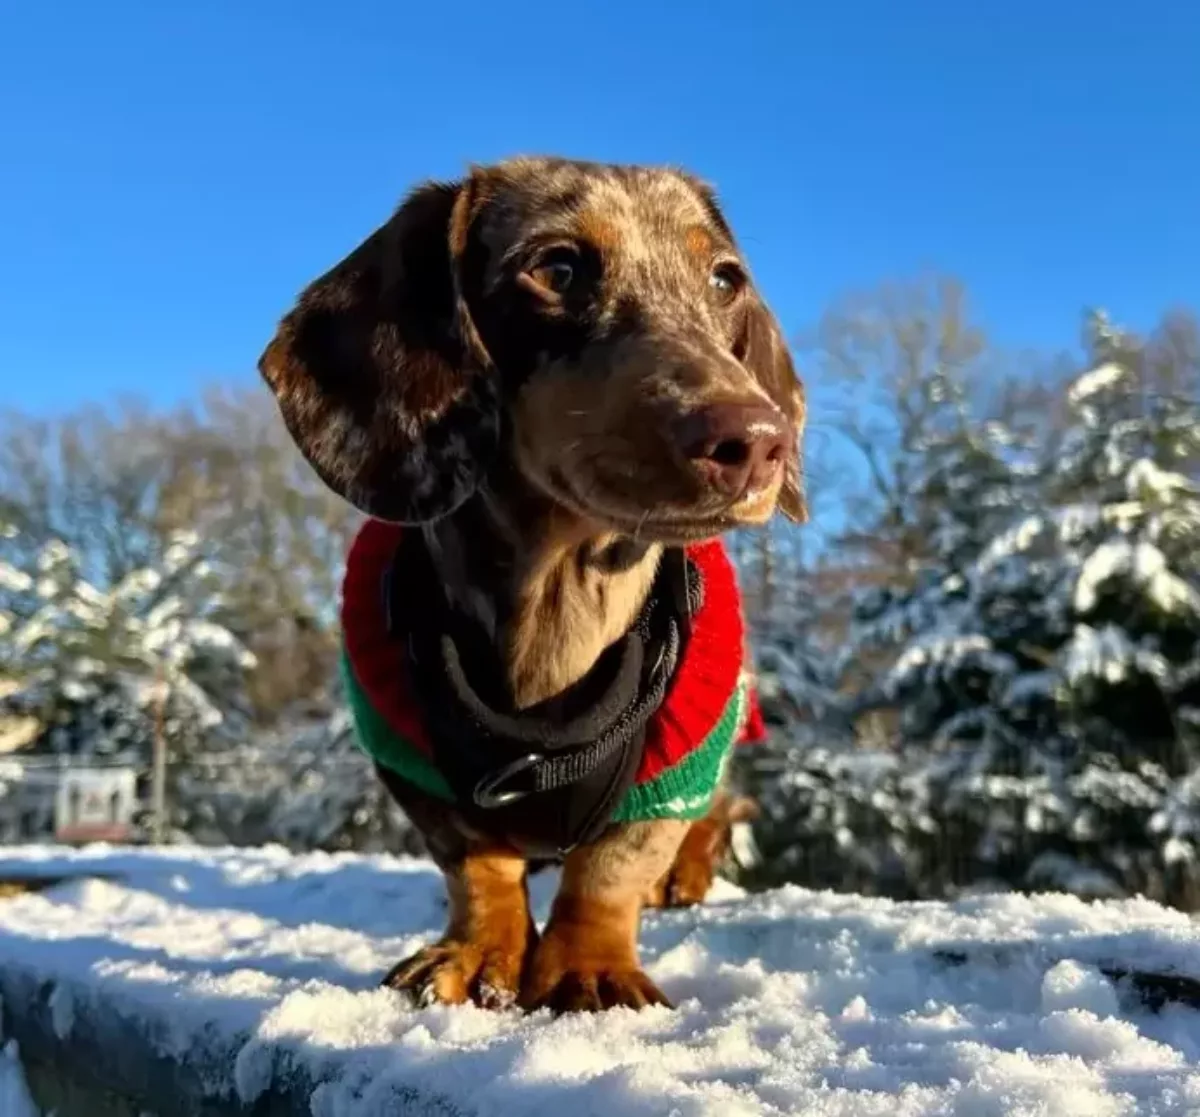 Dog in Christmas jumper excited for Christmas